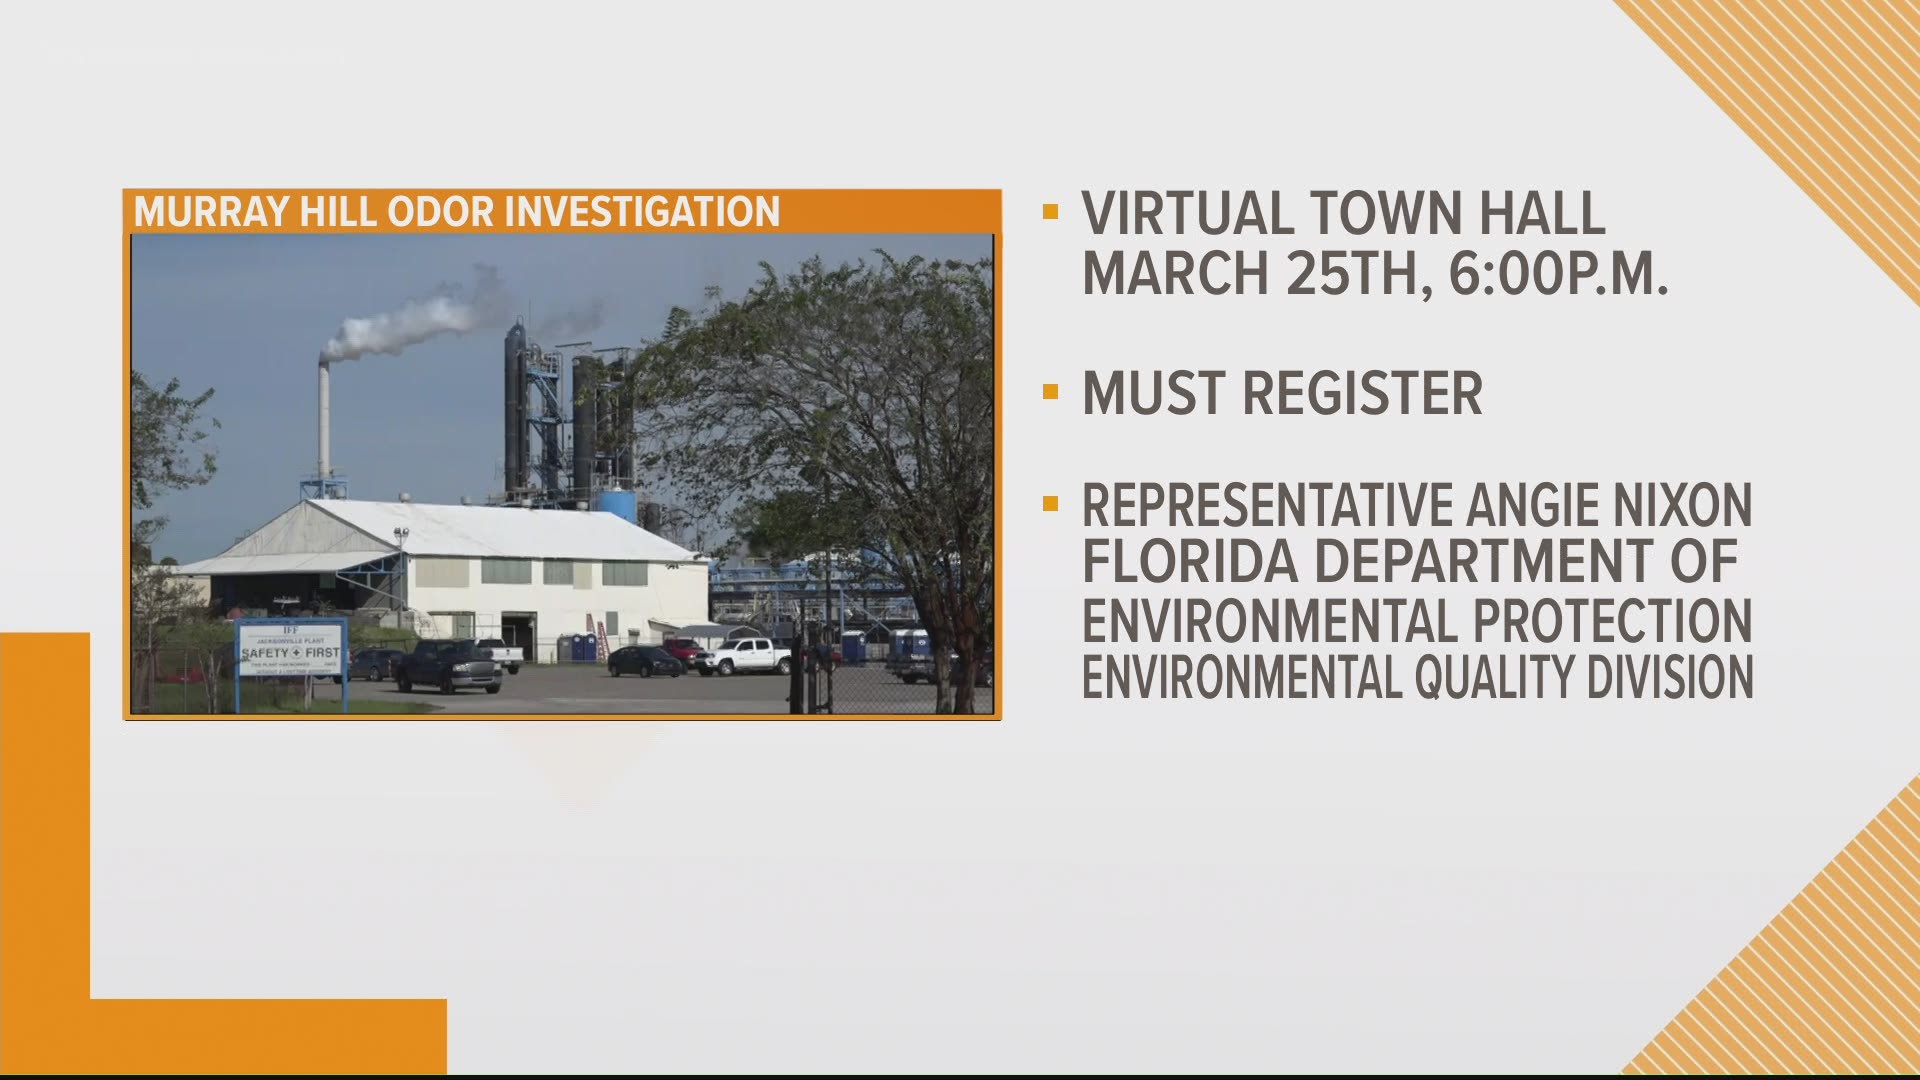 The virtual town hall is March 25 at 6 p.m. and you must register, which you can do here.